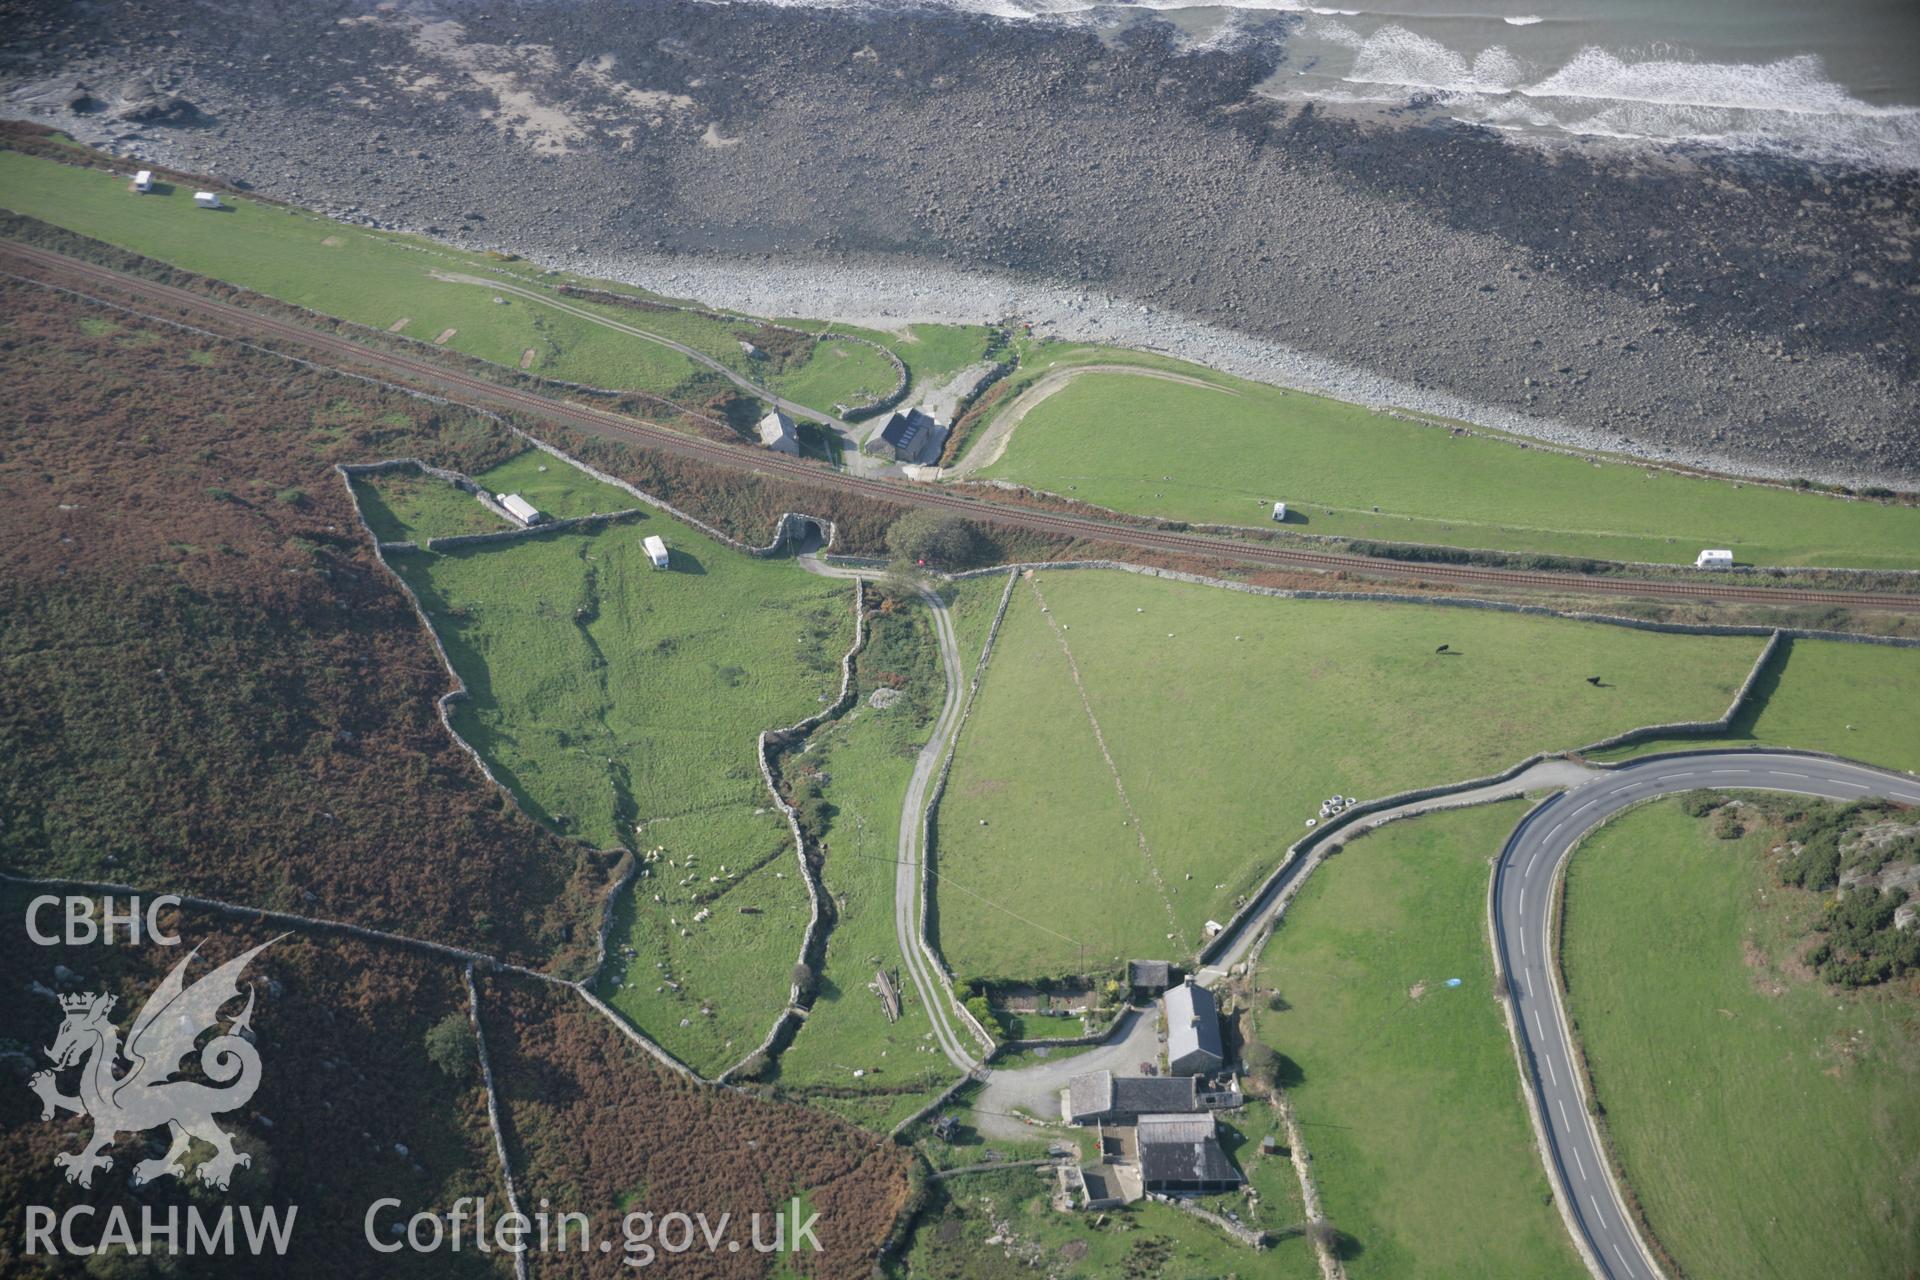 RCAHMW colour oblique aerial photograph of showing landscape view of cove and railway bridge, Felin Fraenan, viewed from the east. Taken on 17 October 2005 by Toby Driver